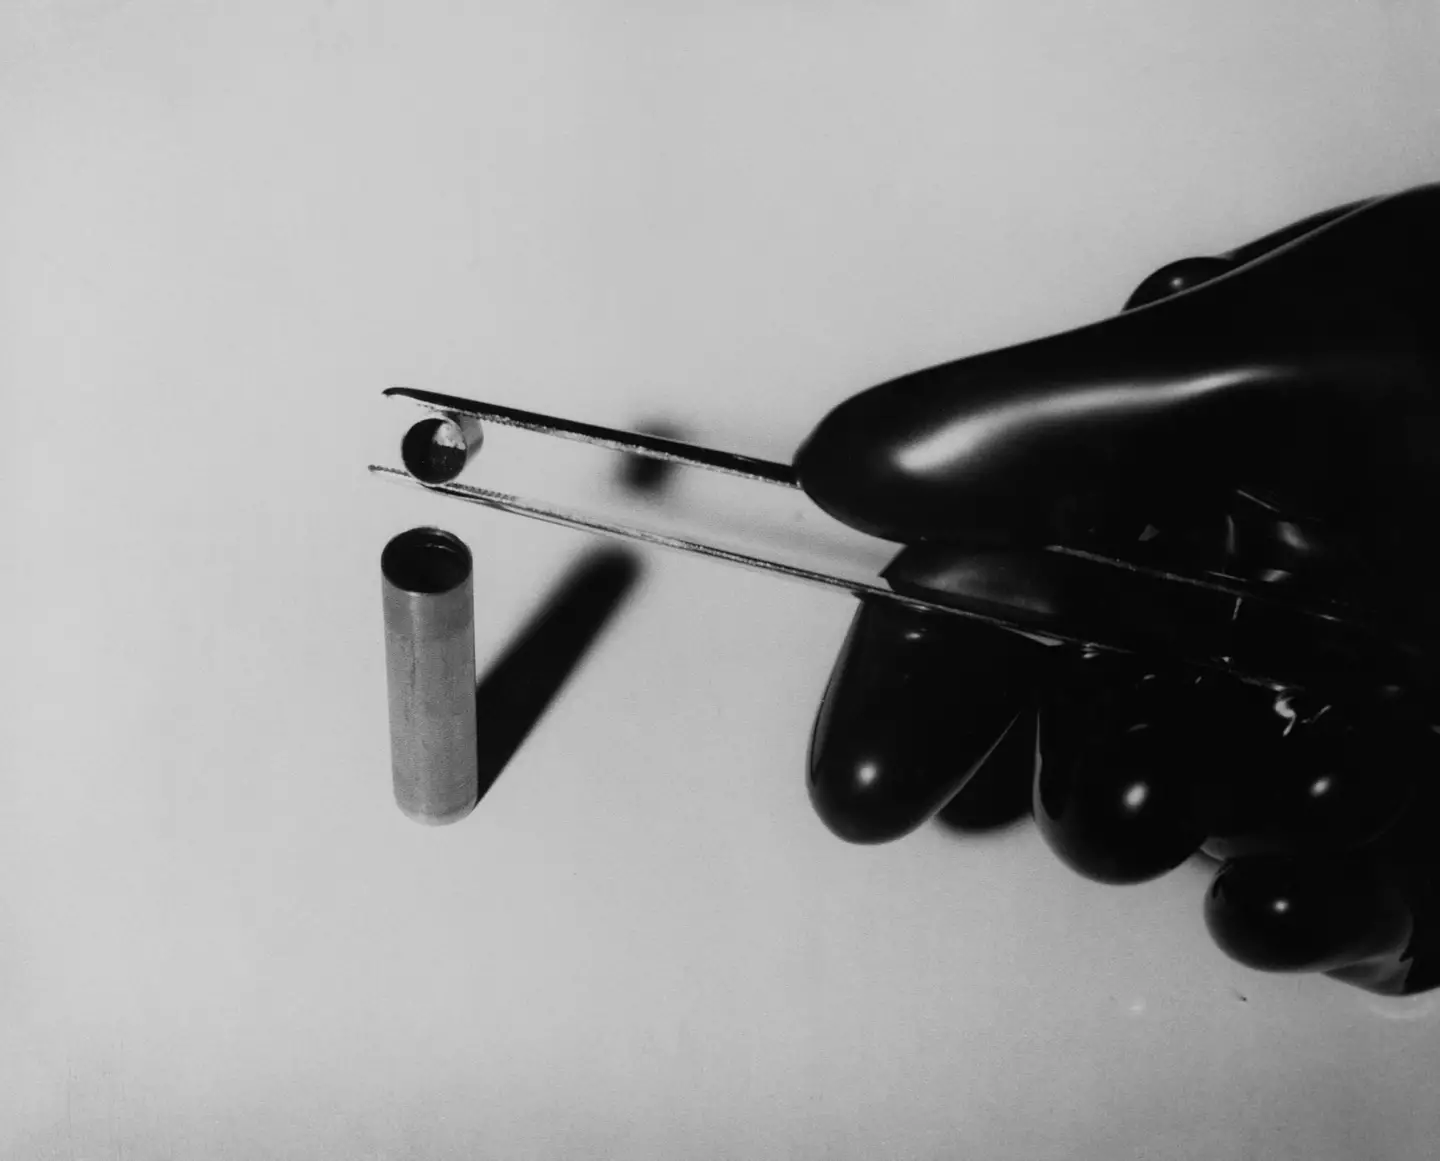 A radioactive substance being poured into a tantalum capsule.